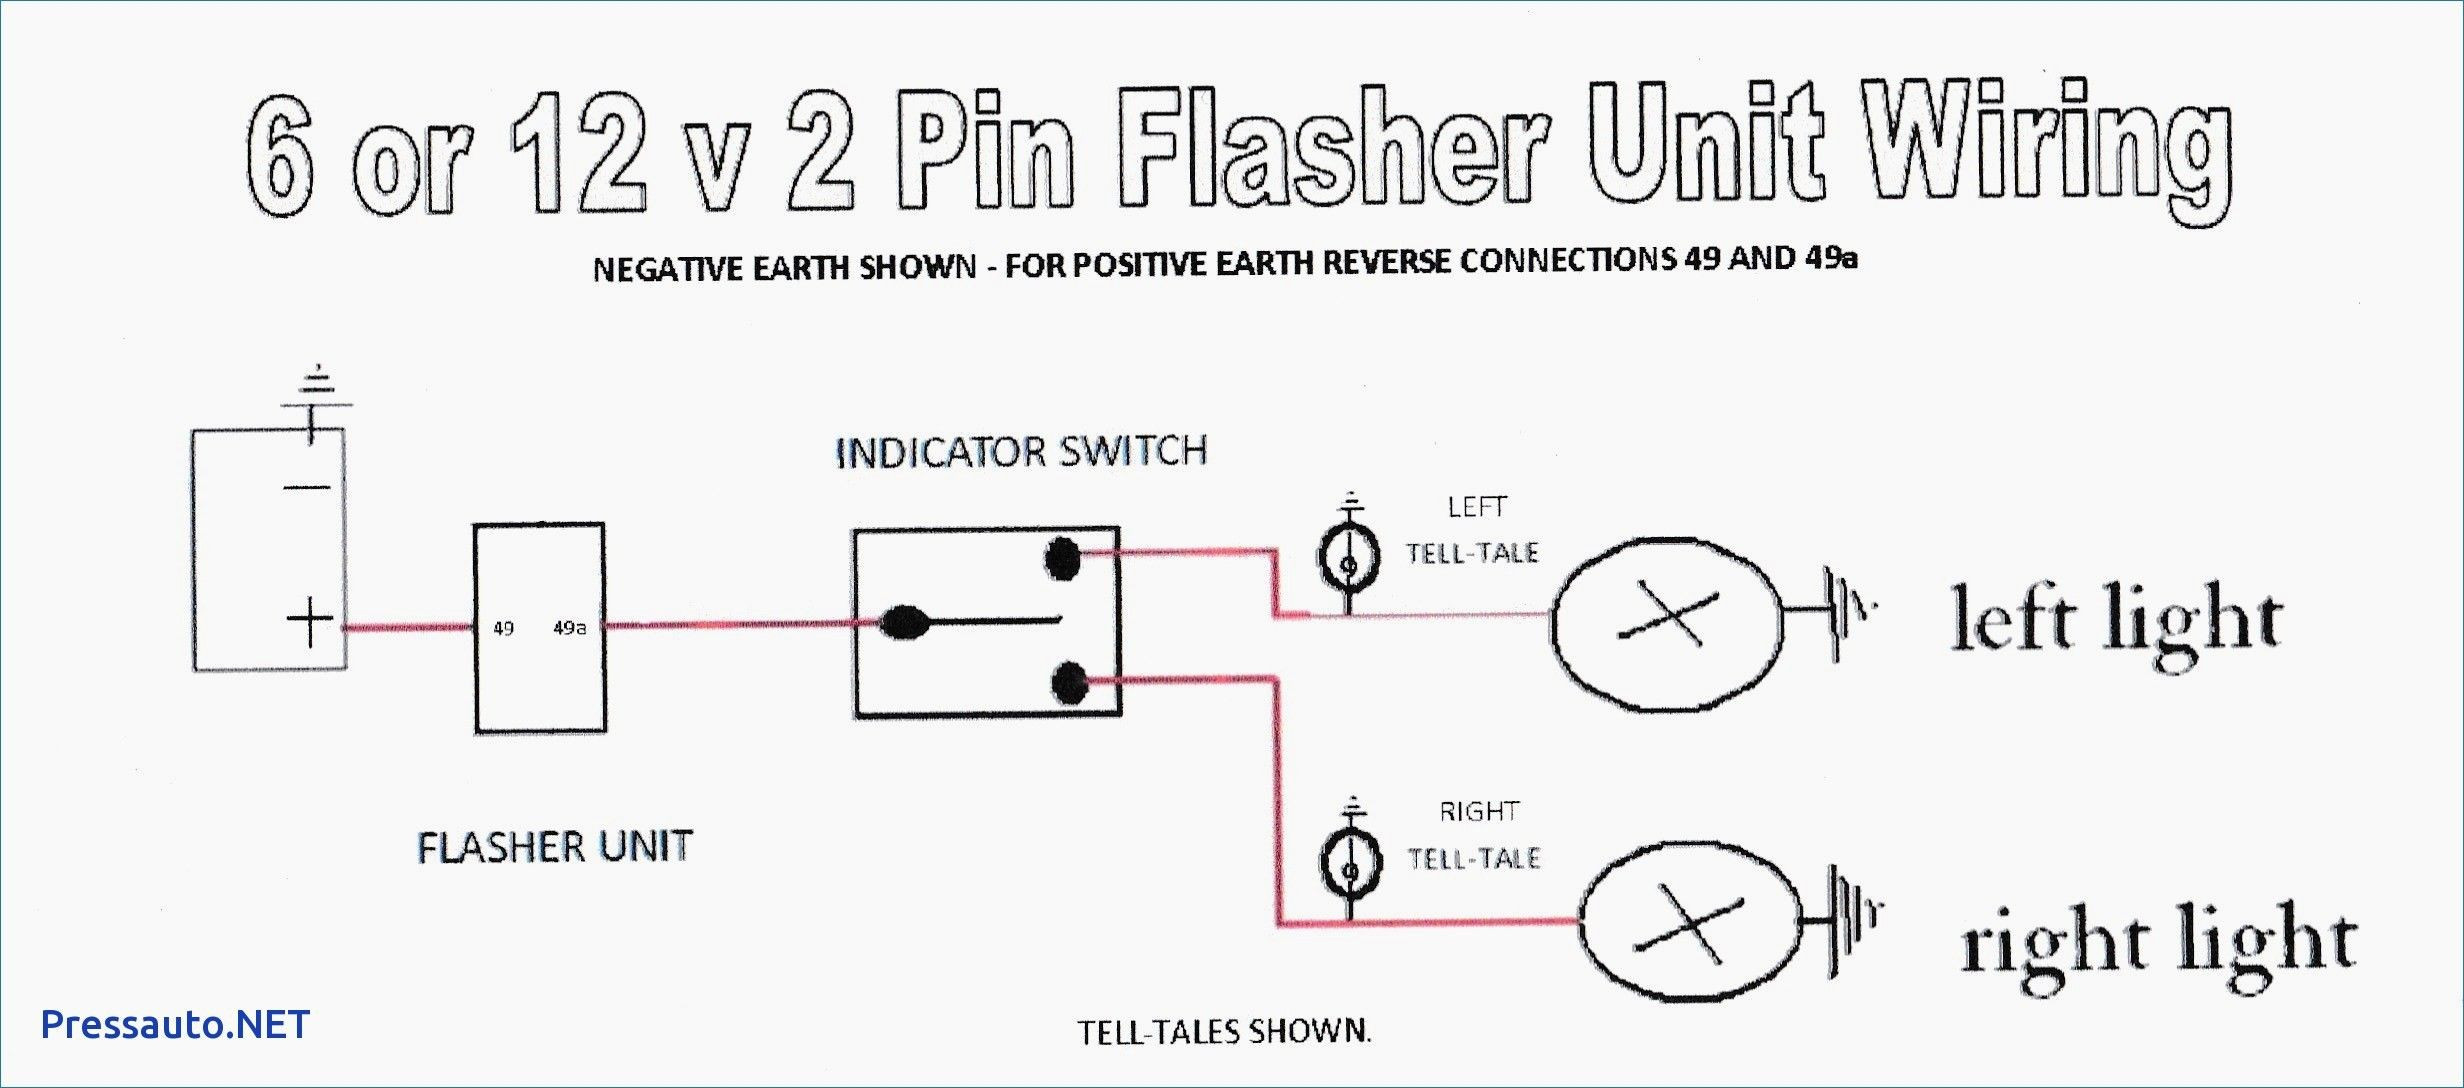 How Do I Wire A 12 Volt Light Flasher with Two Poles 4 Pole Starter solenoid Wiring Diagram Download Trailer Light ...